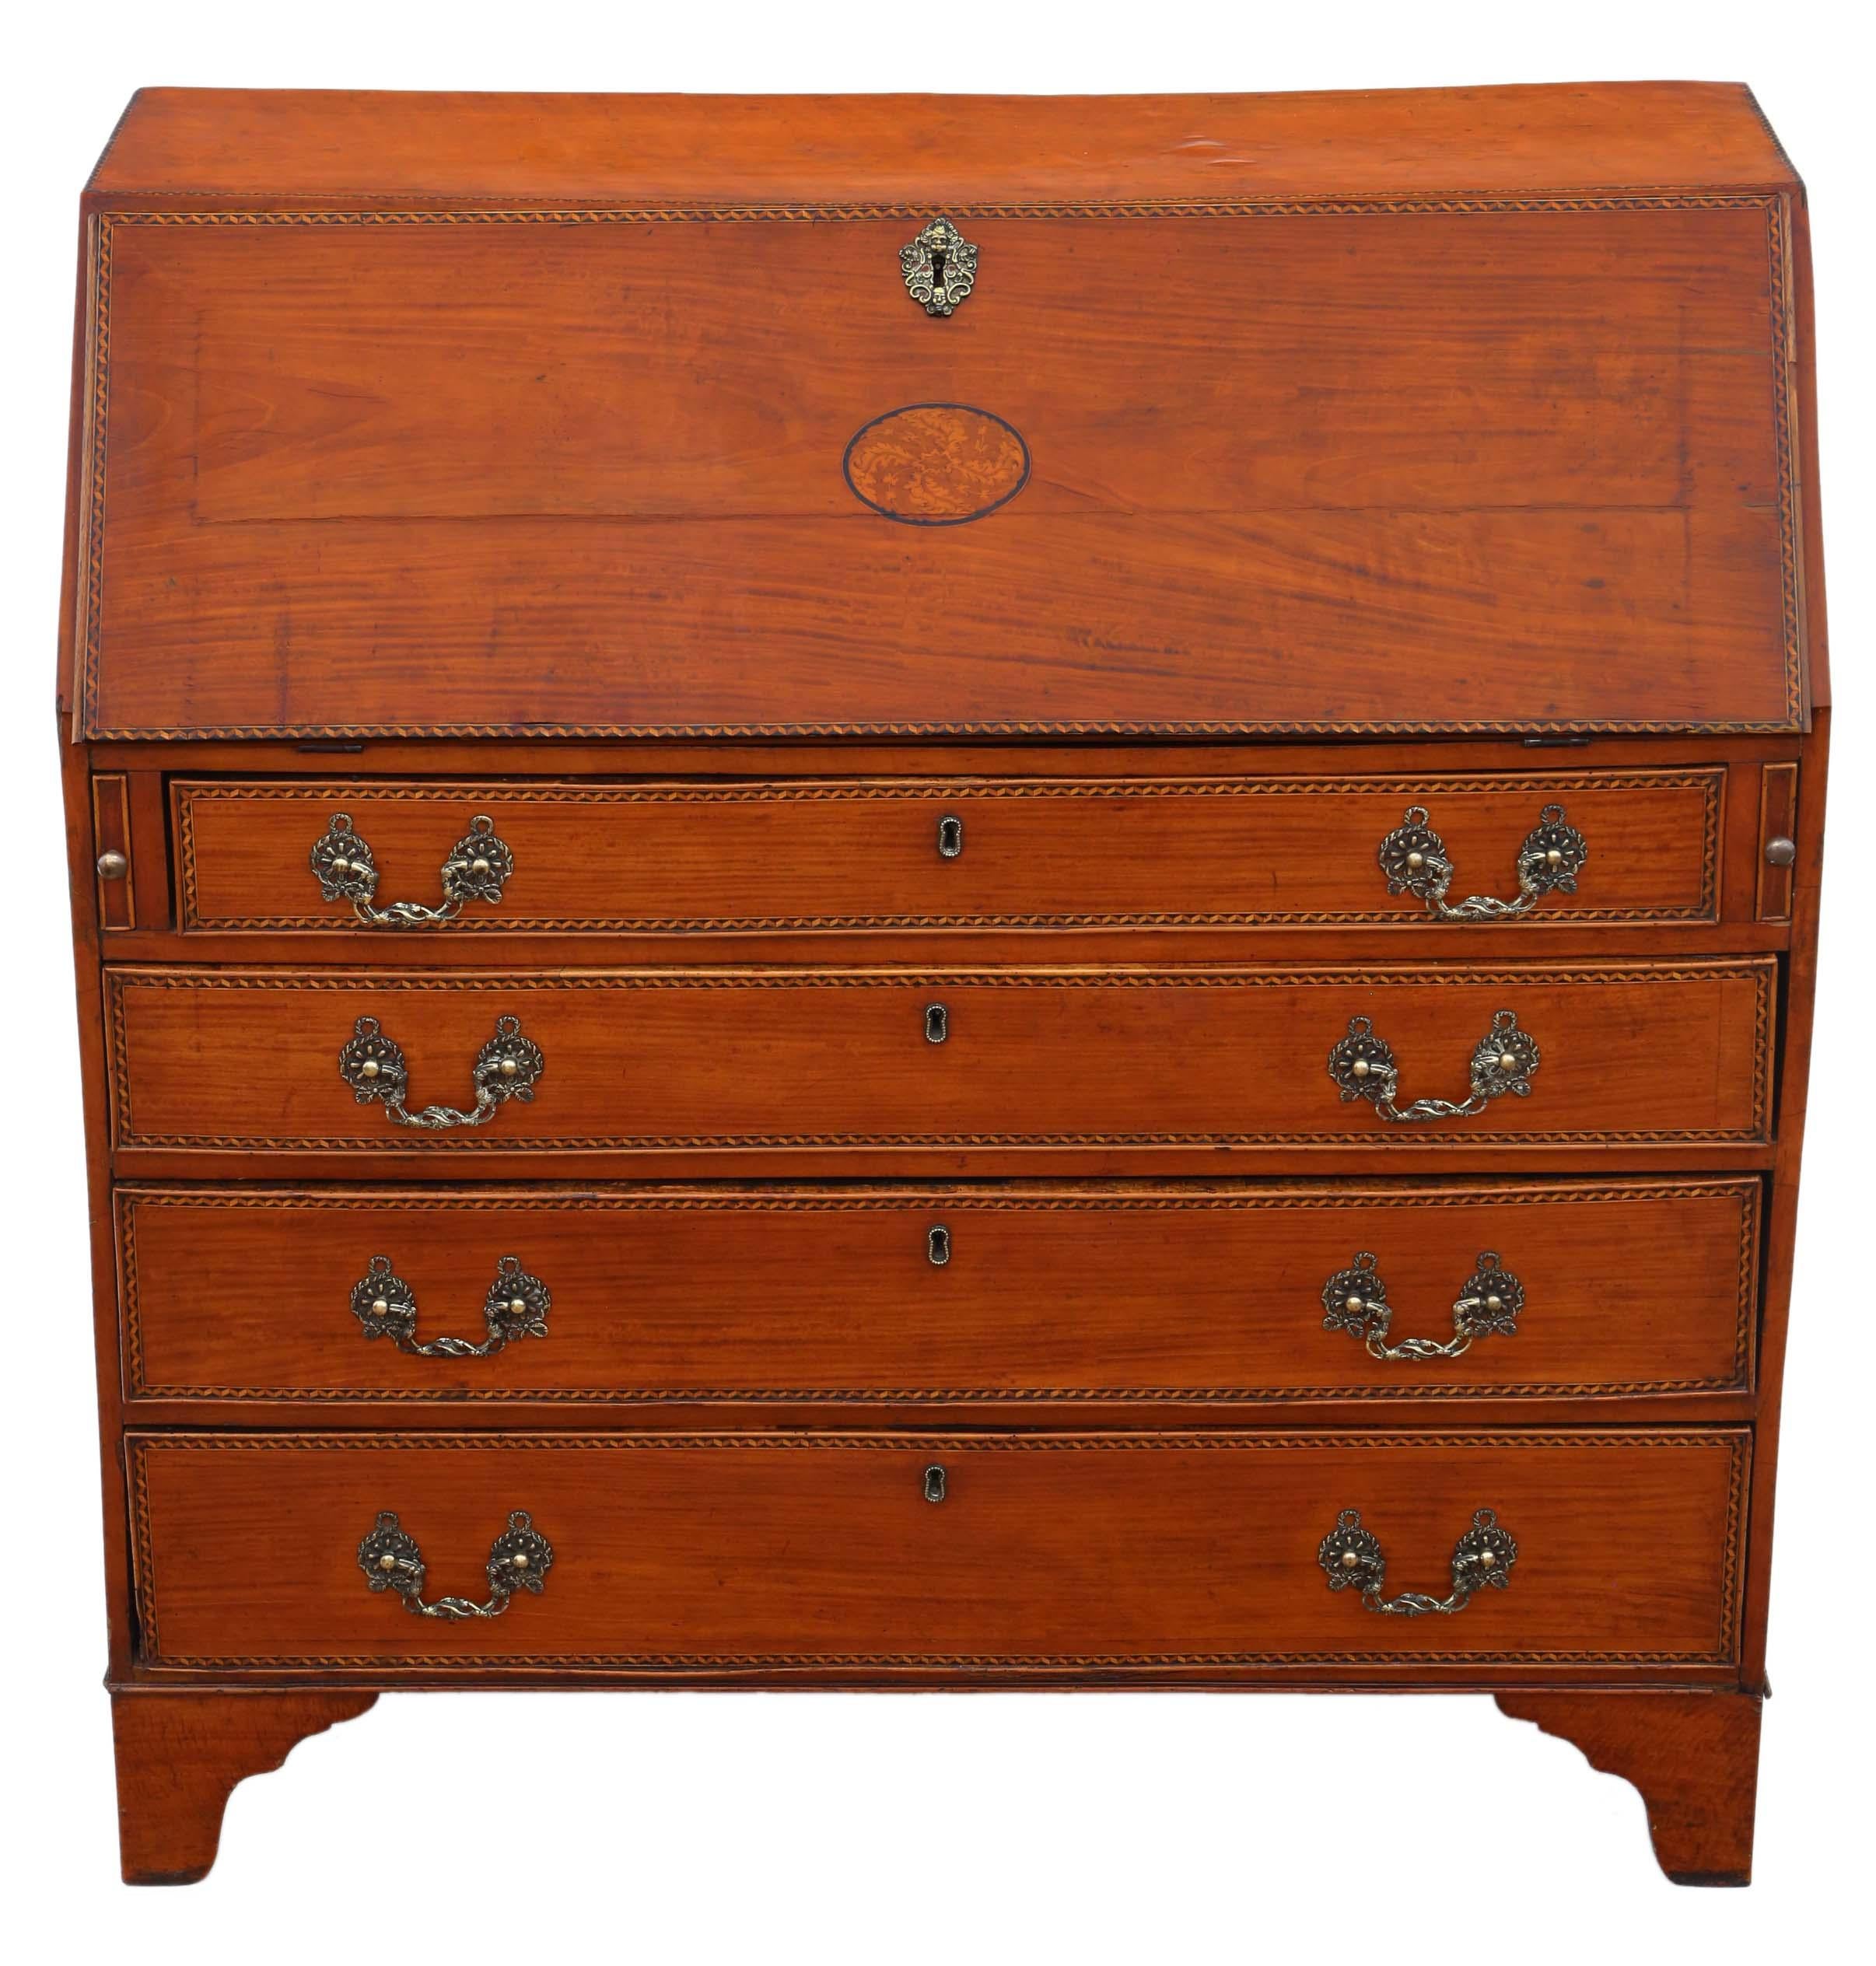 Antique Georgian 18th century satin walnut bureau desk writing table. Veneer on oak and elm construction. Early satin walnut bureaux are very rare. 

This is a lovely bureau, that is full of age, charm and character. Attractive inlays.

No loose